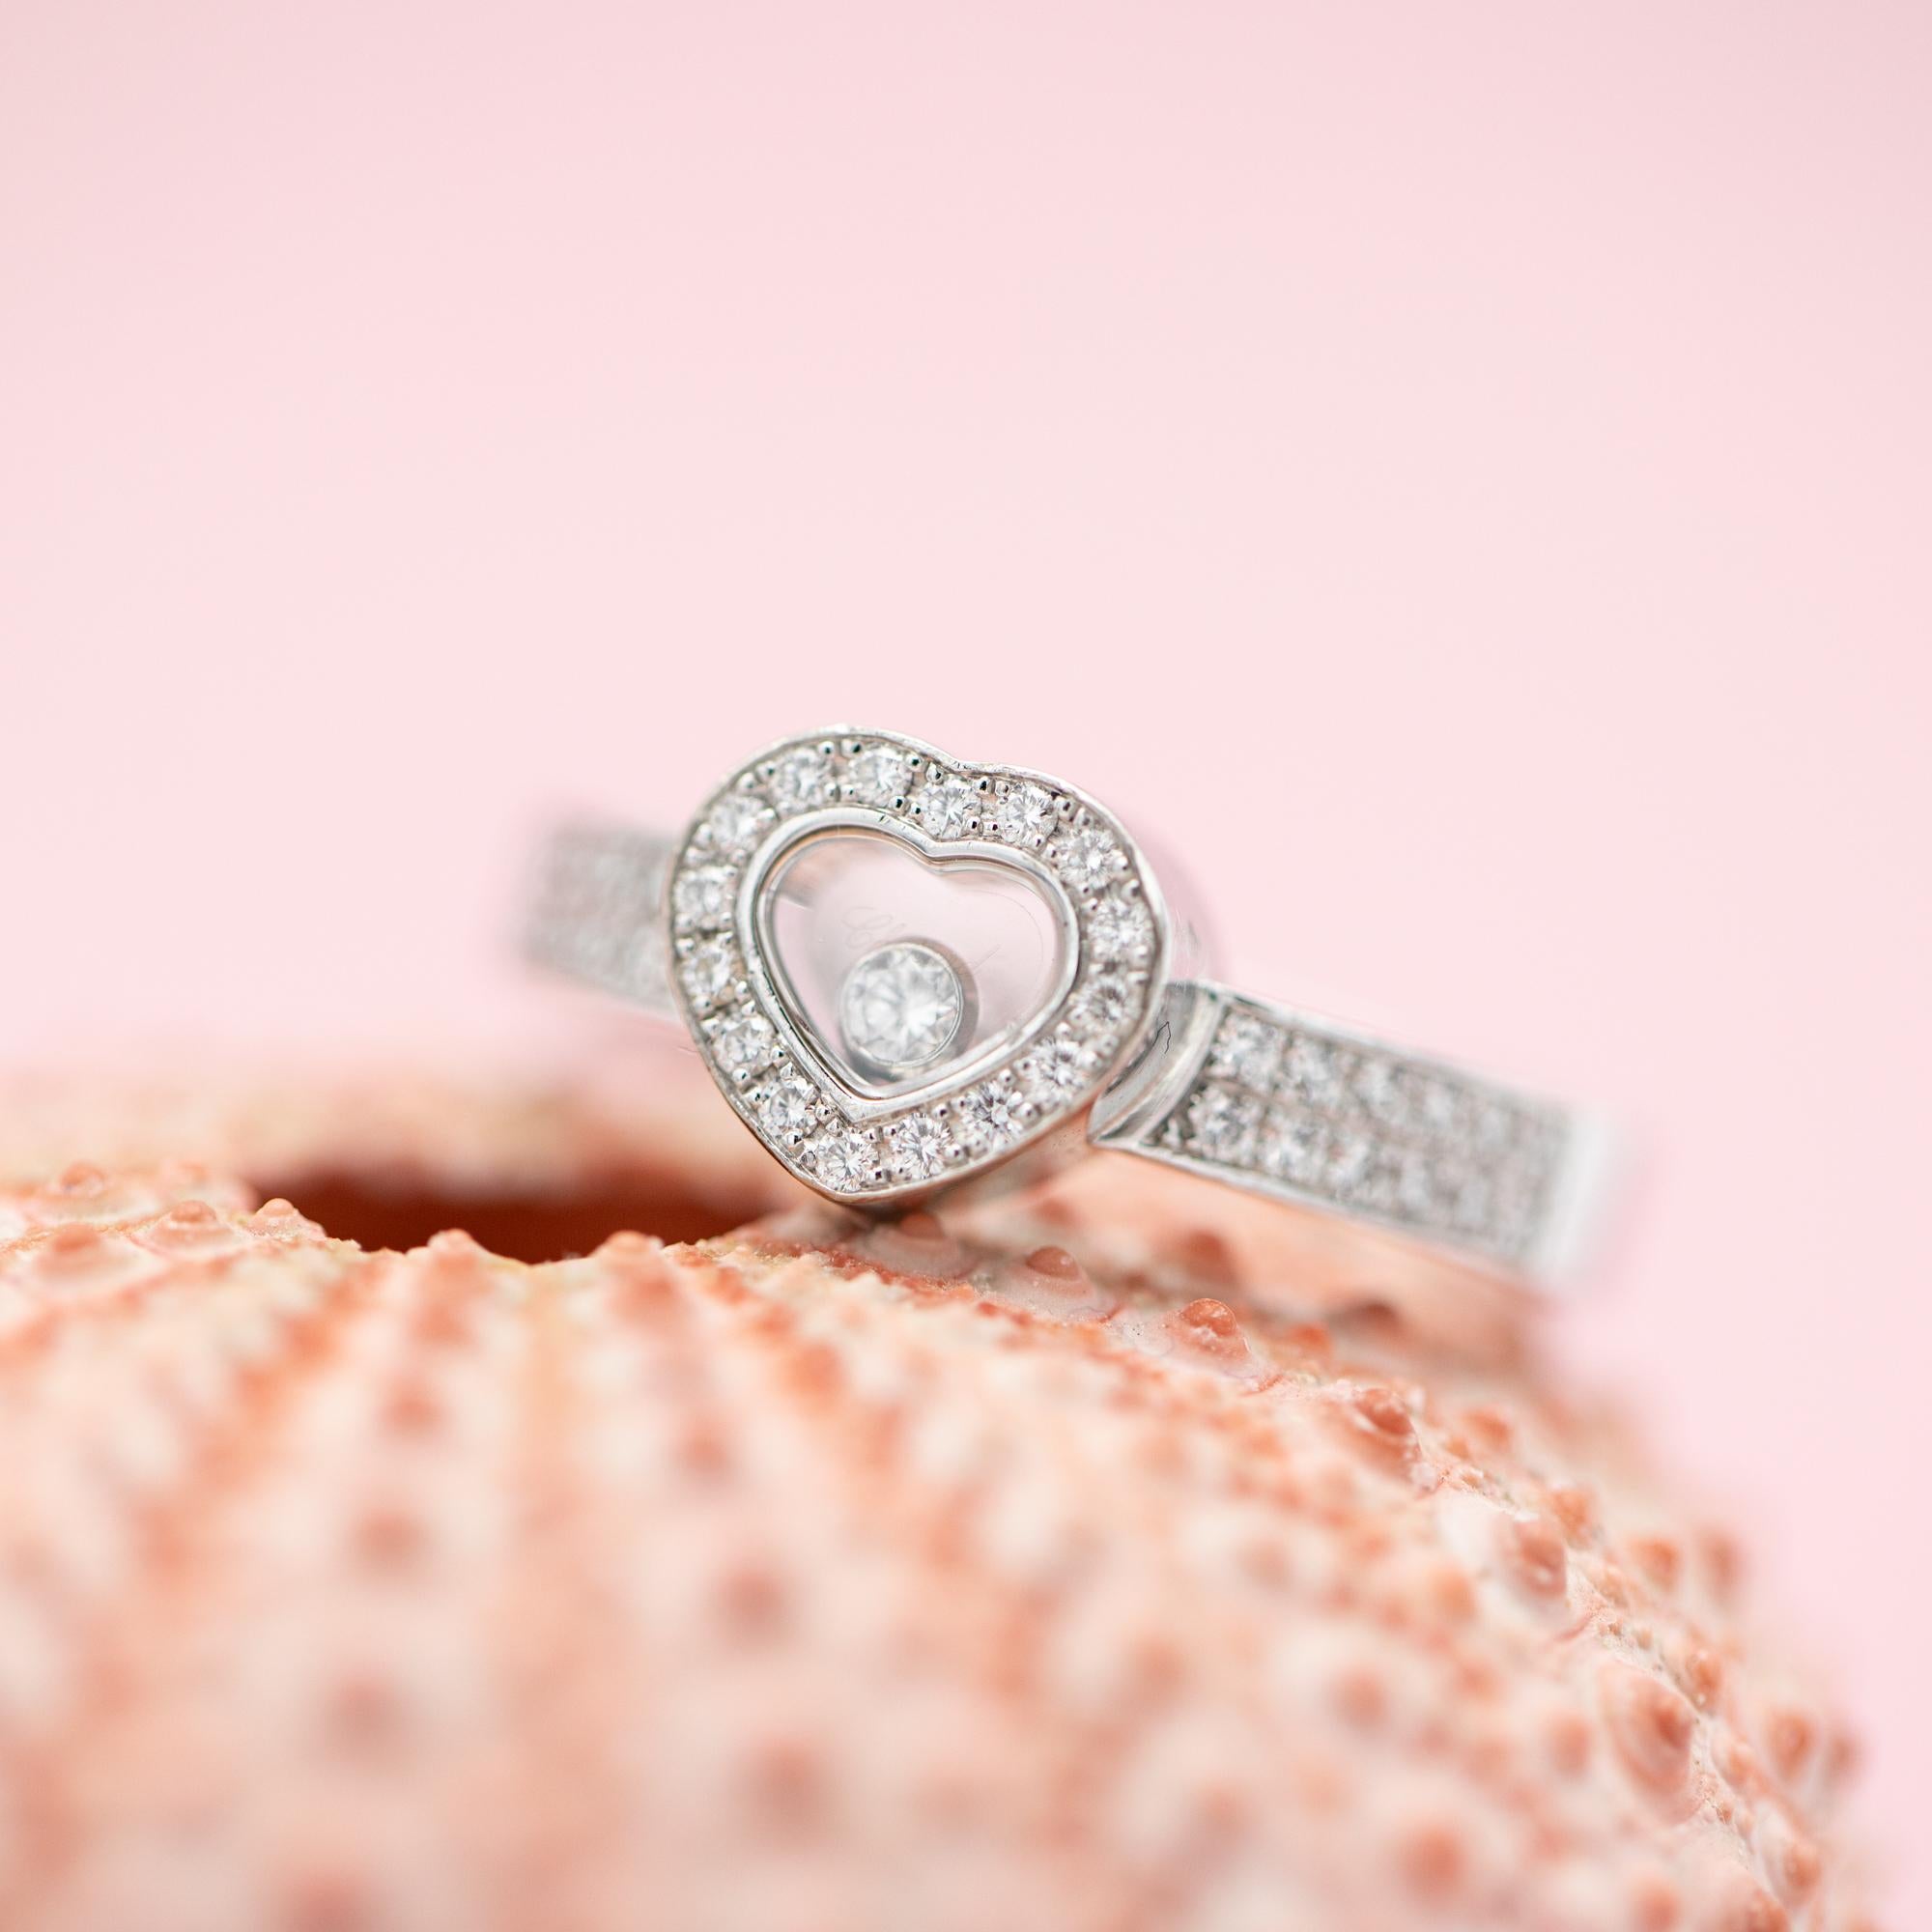 For sale is this wonderful and timeless Chopard ring. This 18 k white gold ring is set with 41 brilliant cut diamonds. This heart shaped ring is from Chopards 'Happy Diamonds' collection. A brilliant cut diamond is set between two crystal glasses,